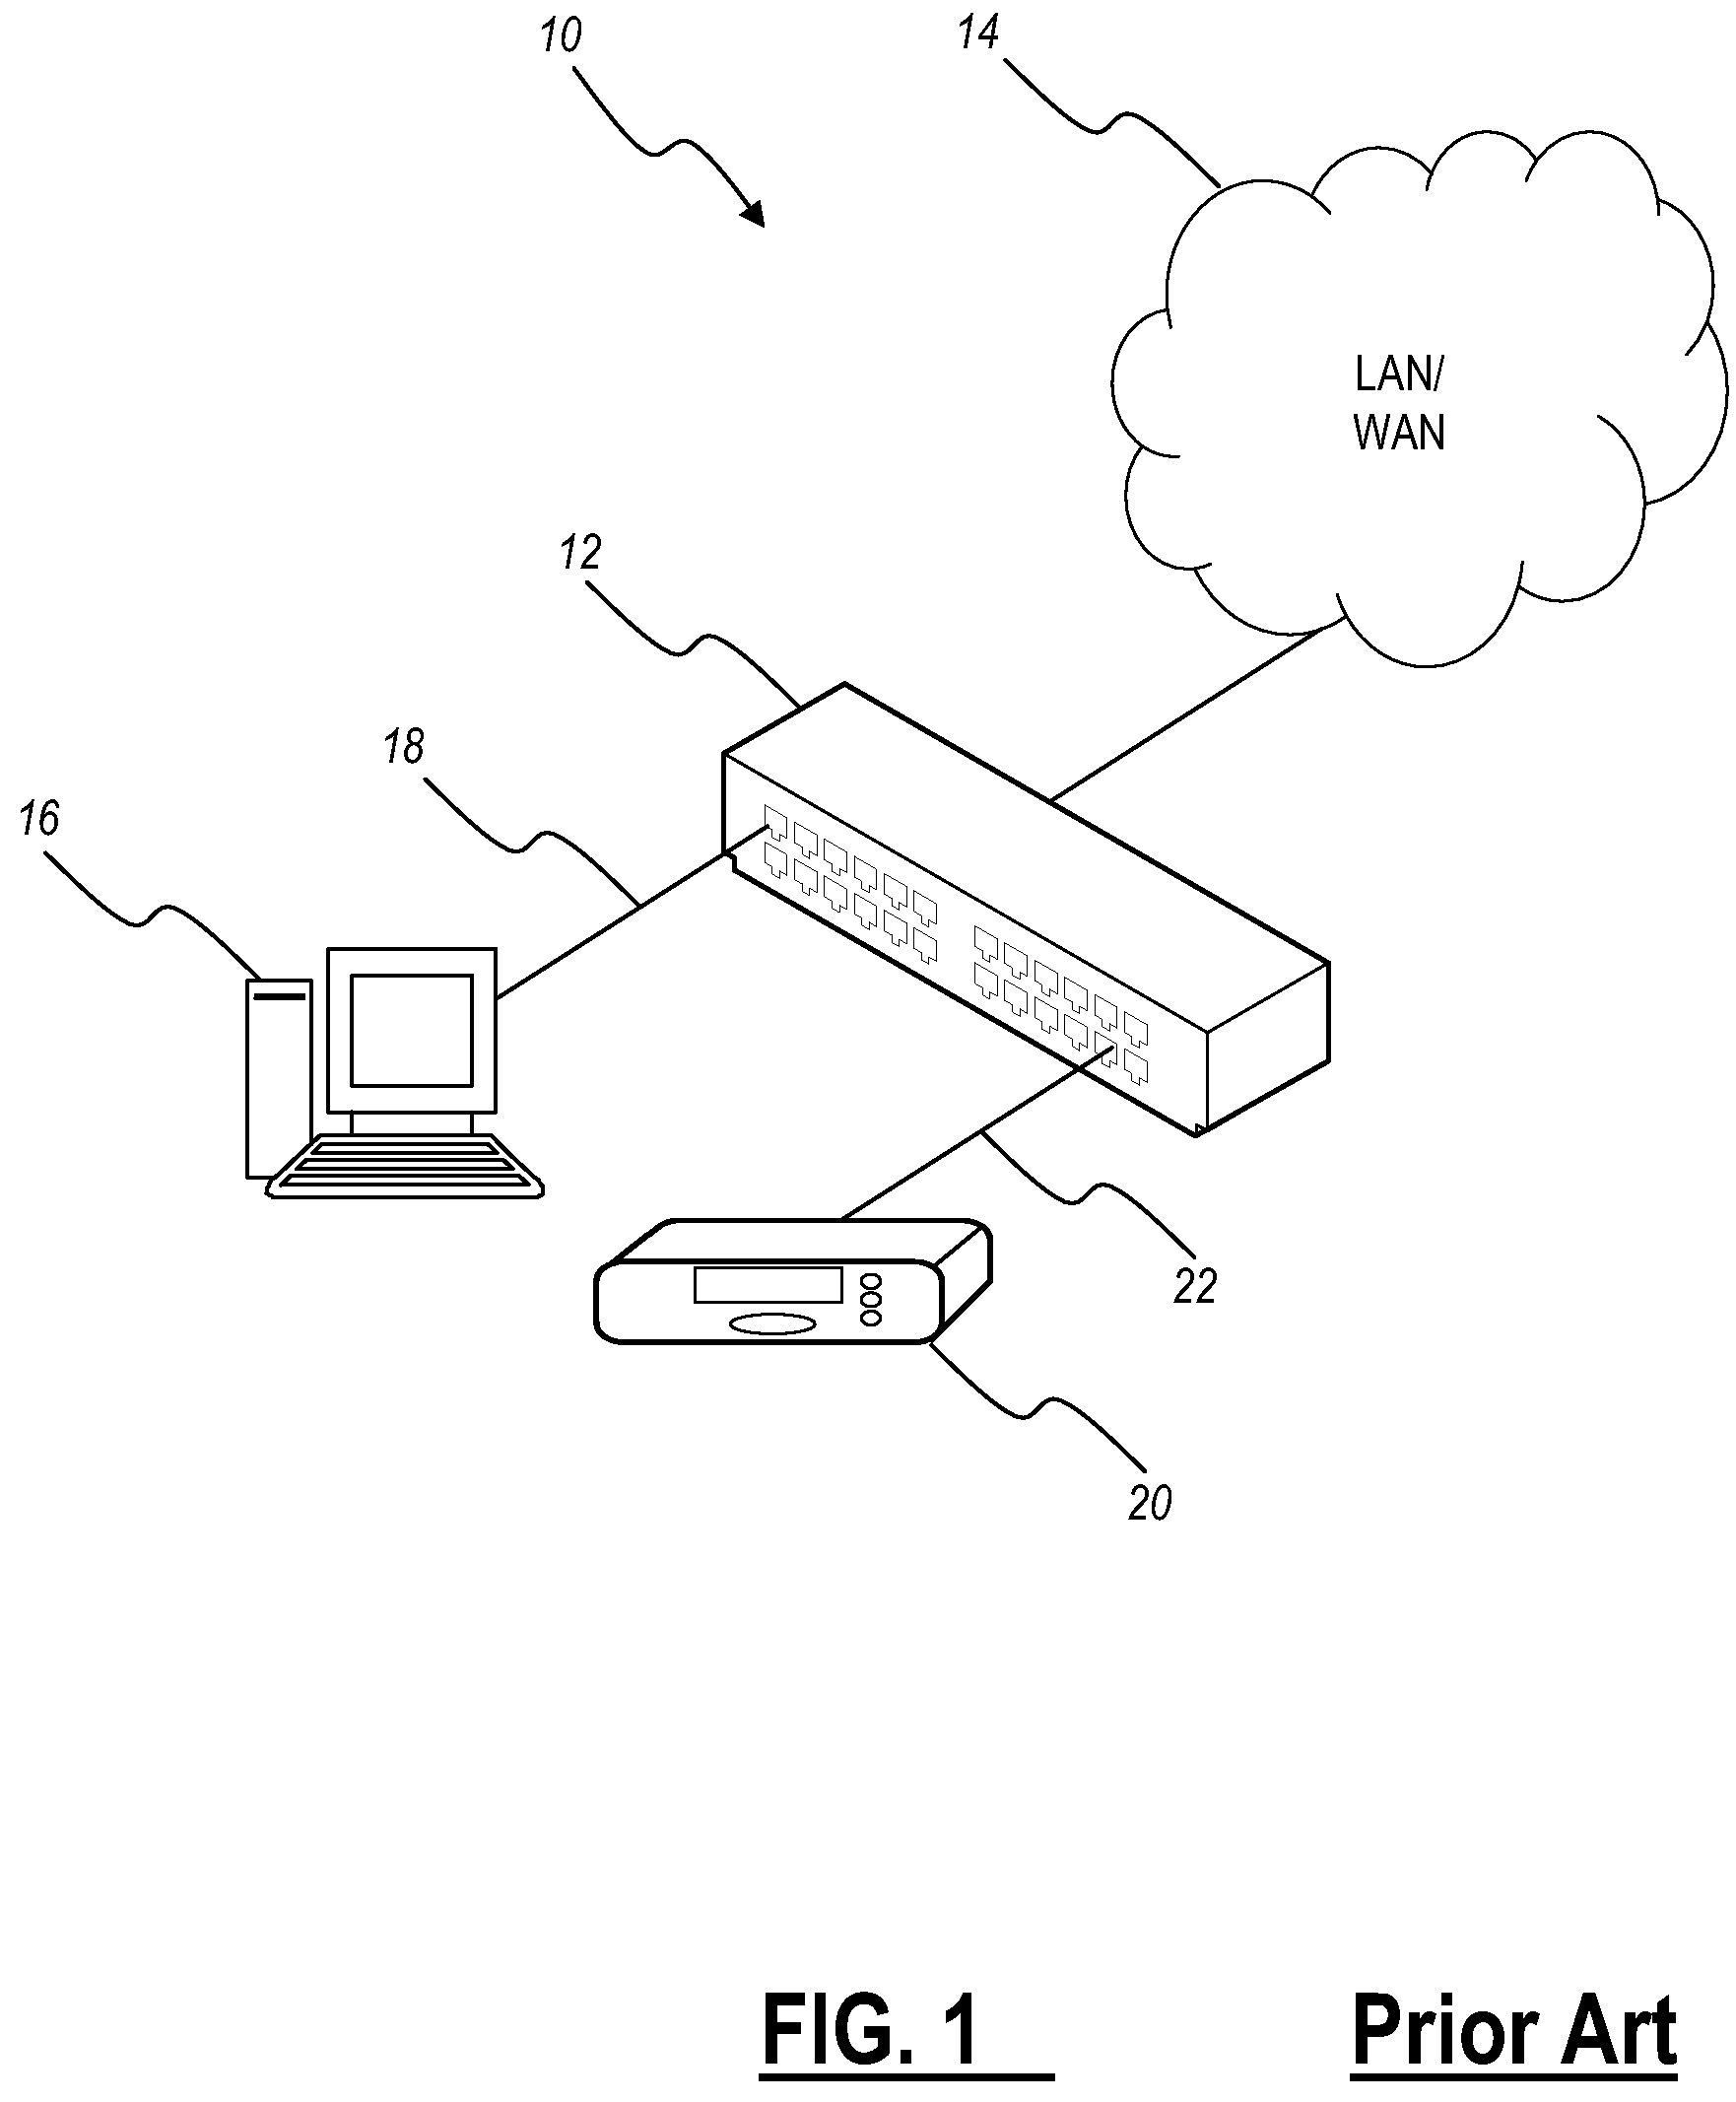 Systems and methods for flow mirroring with network-scoped connection-oriented sink